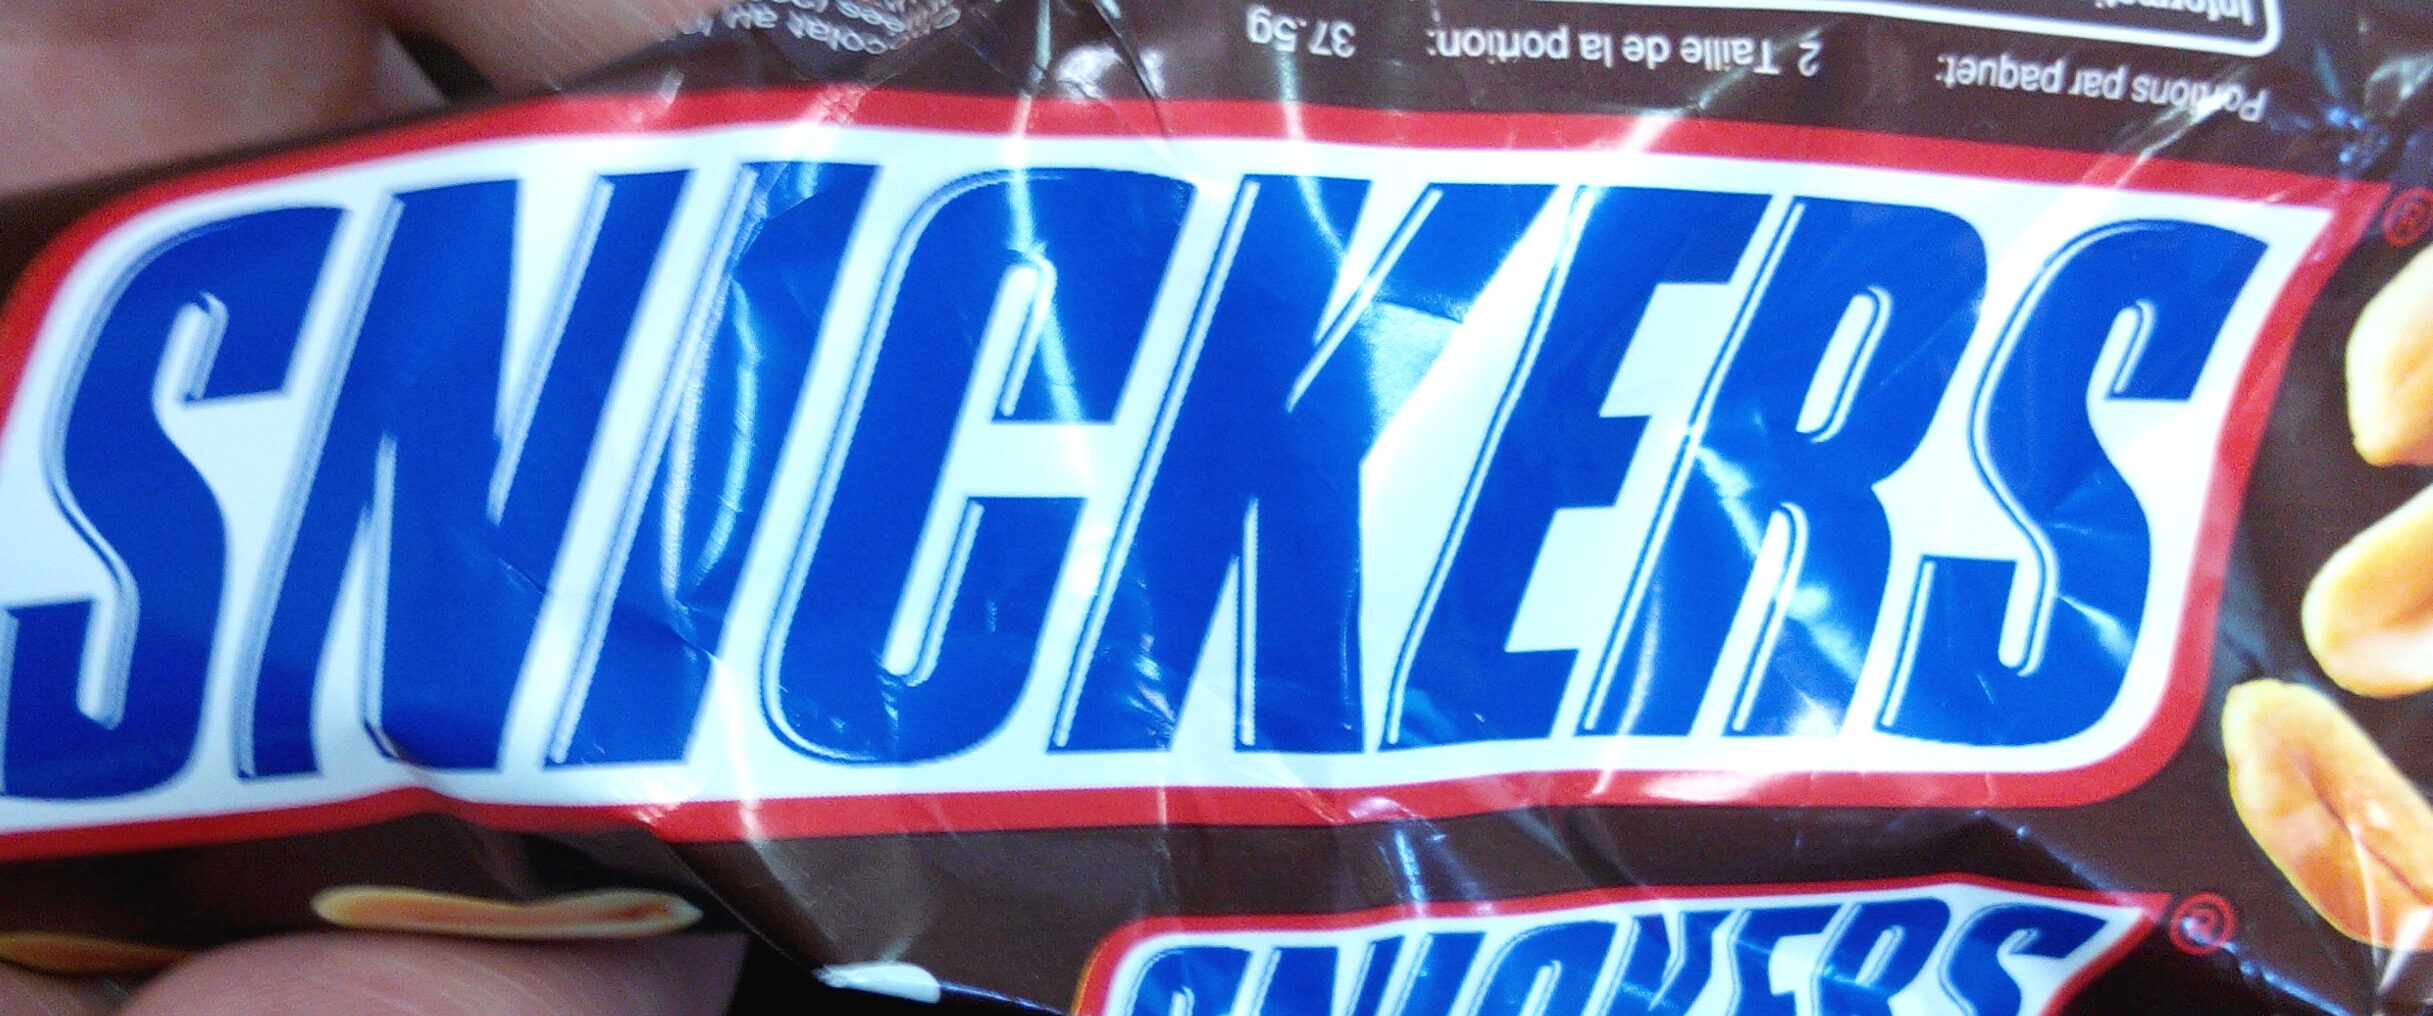 Snickers x2 - Produkt